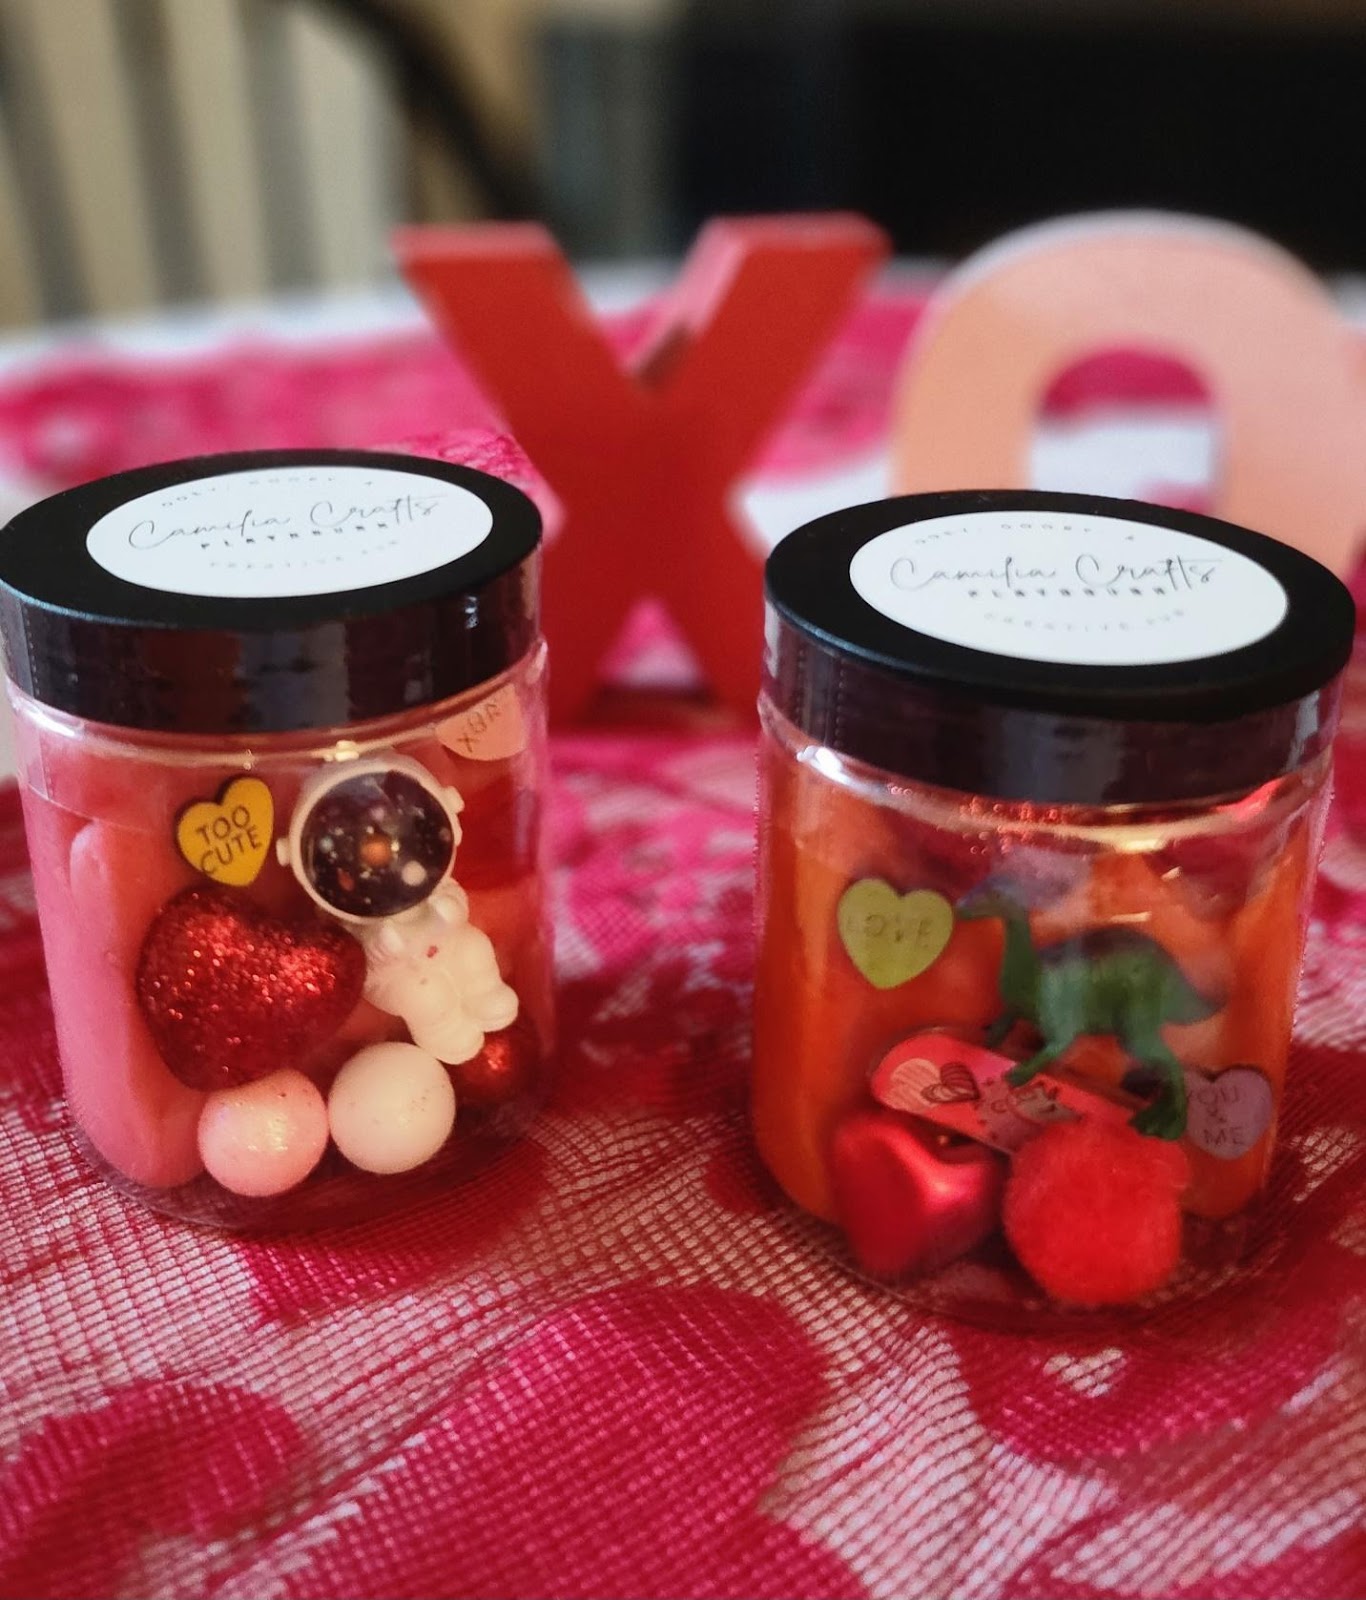 A couple of jars with candyDescription automatically generated with medium confidence